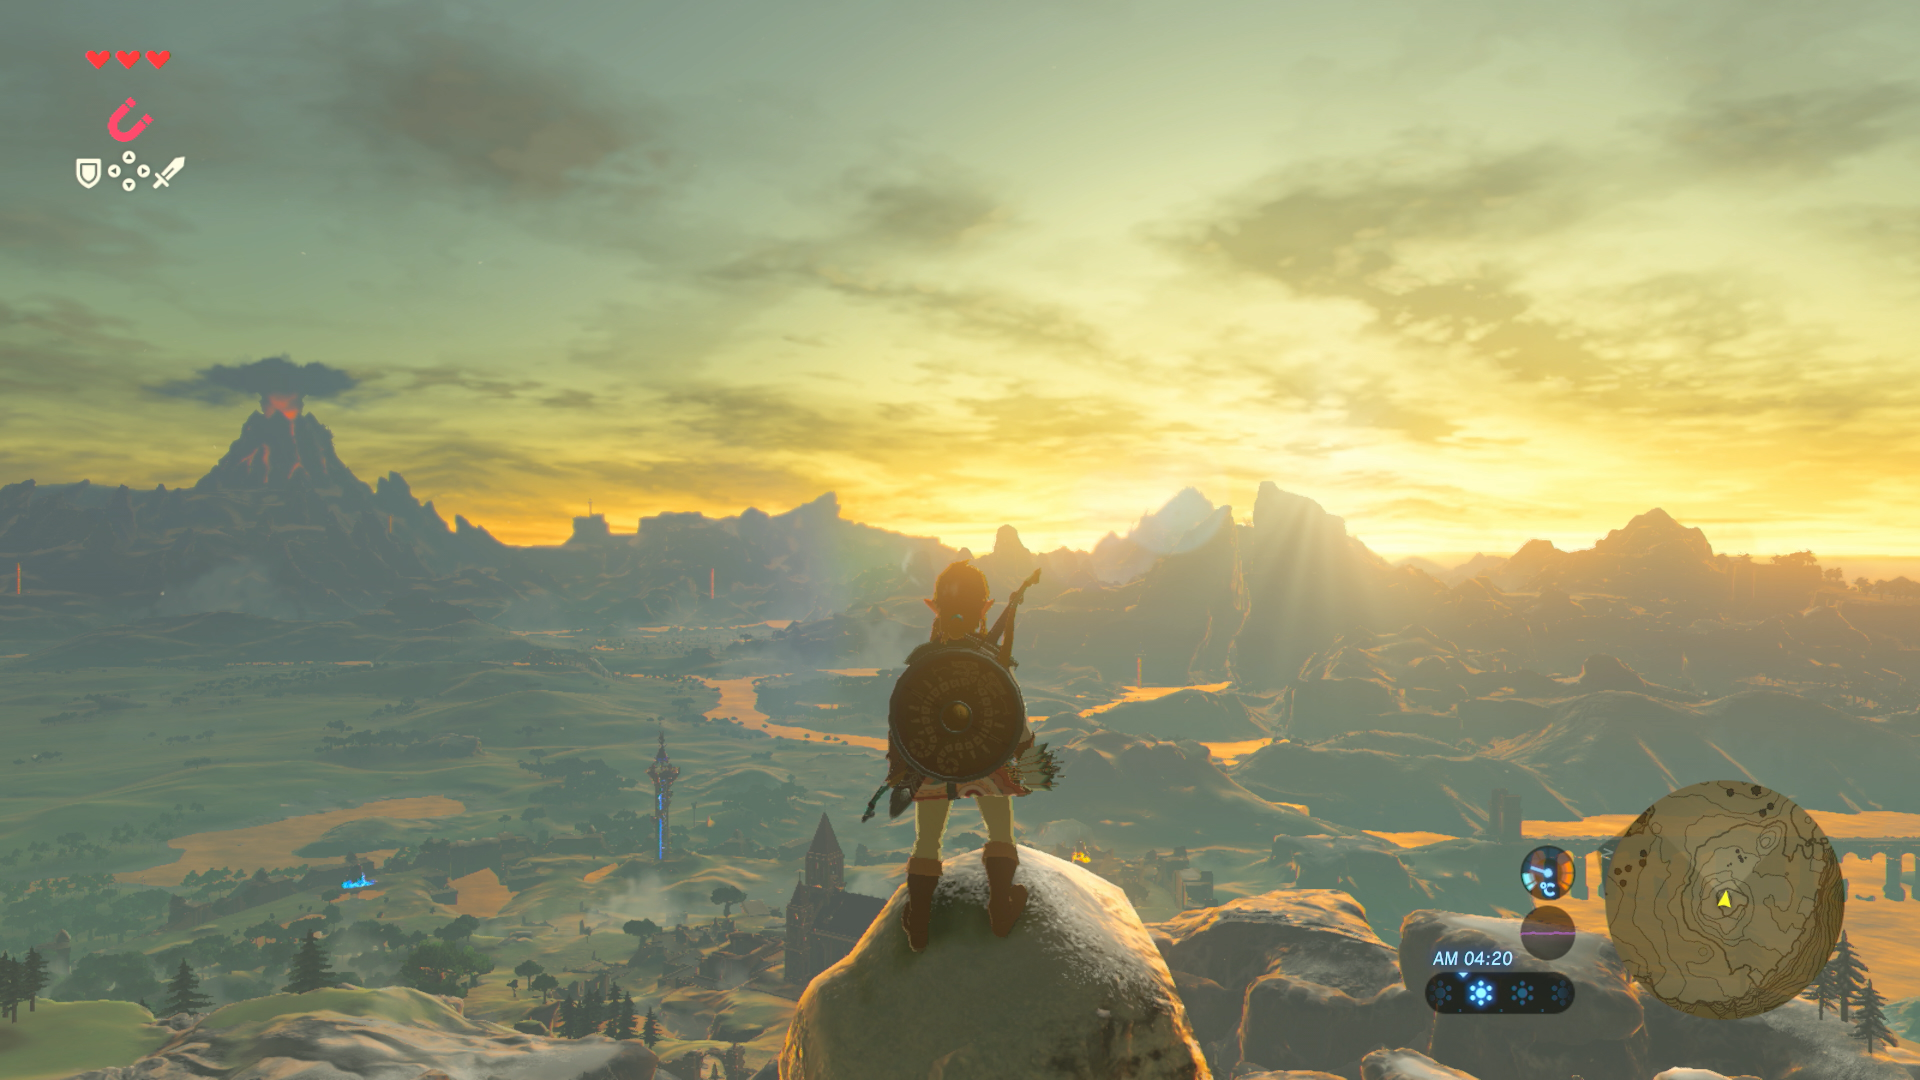 The Legend of Zelda: Breath of the Wild Review